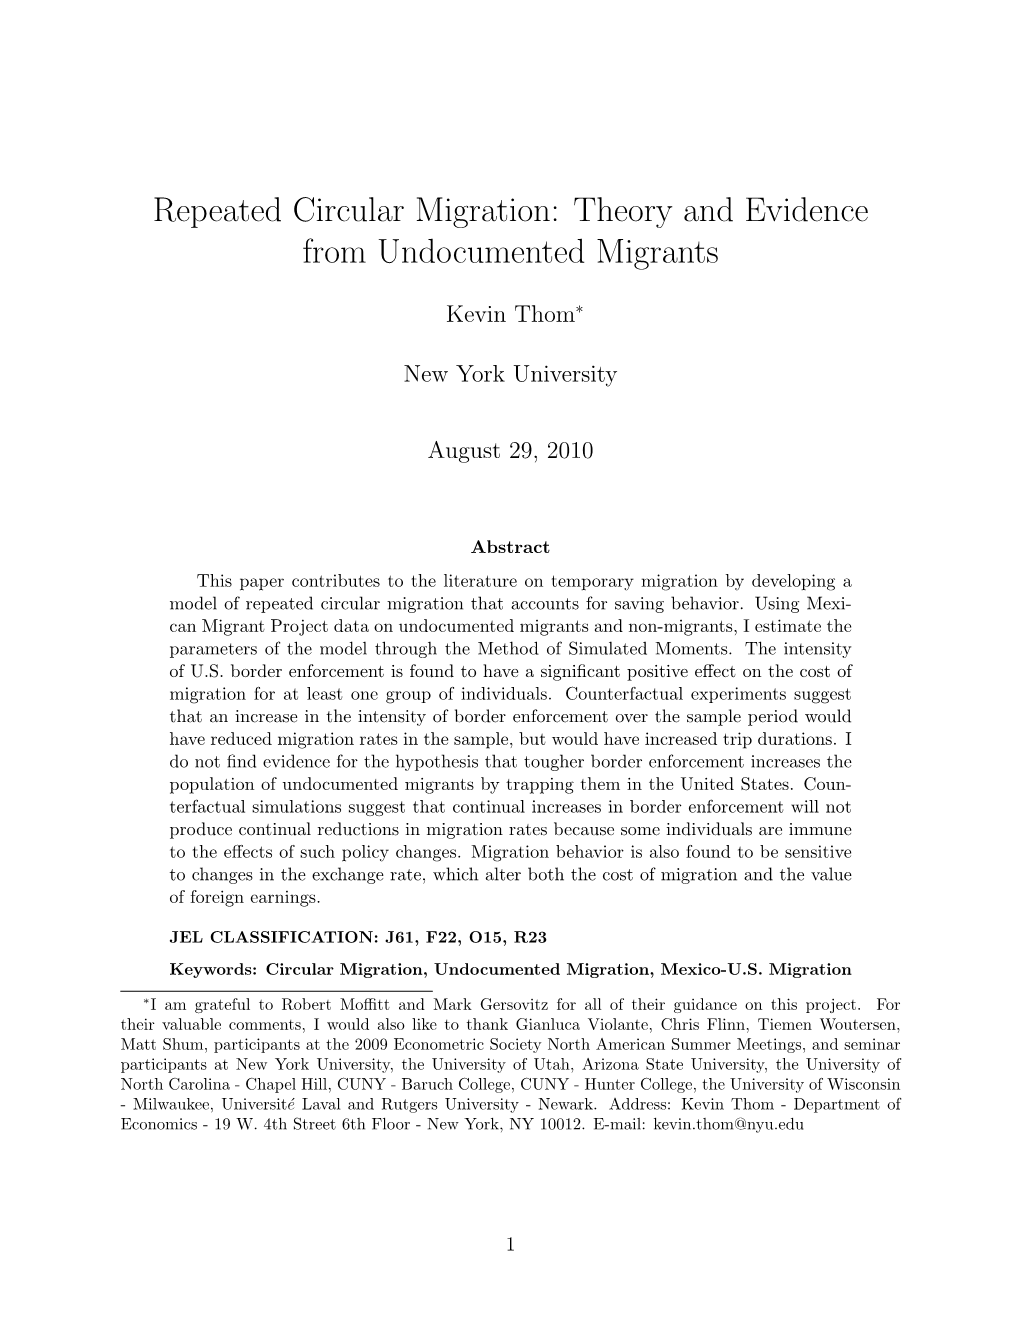 Repeated Circular Migration: Theory and Evidence from Undocumented Migrants